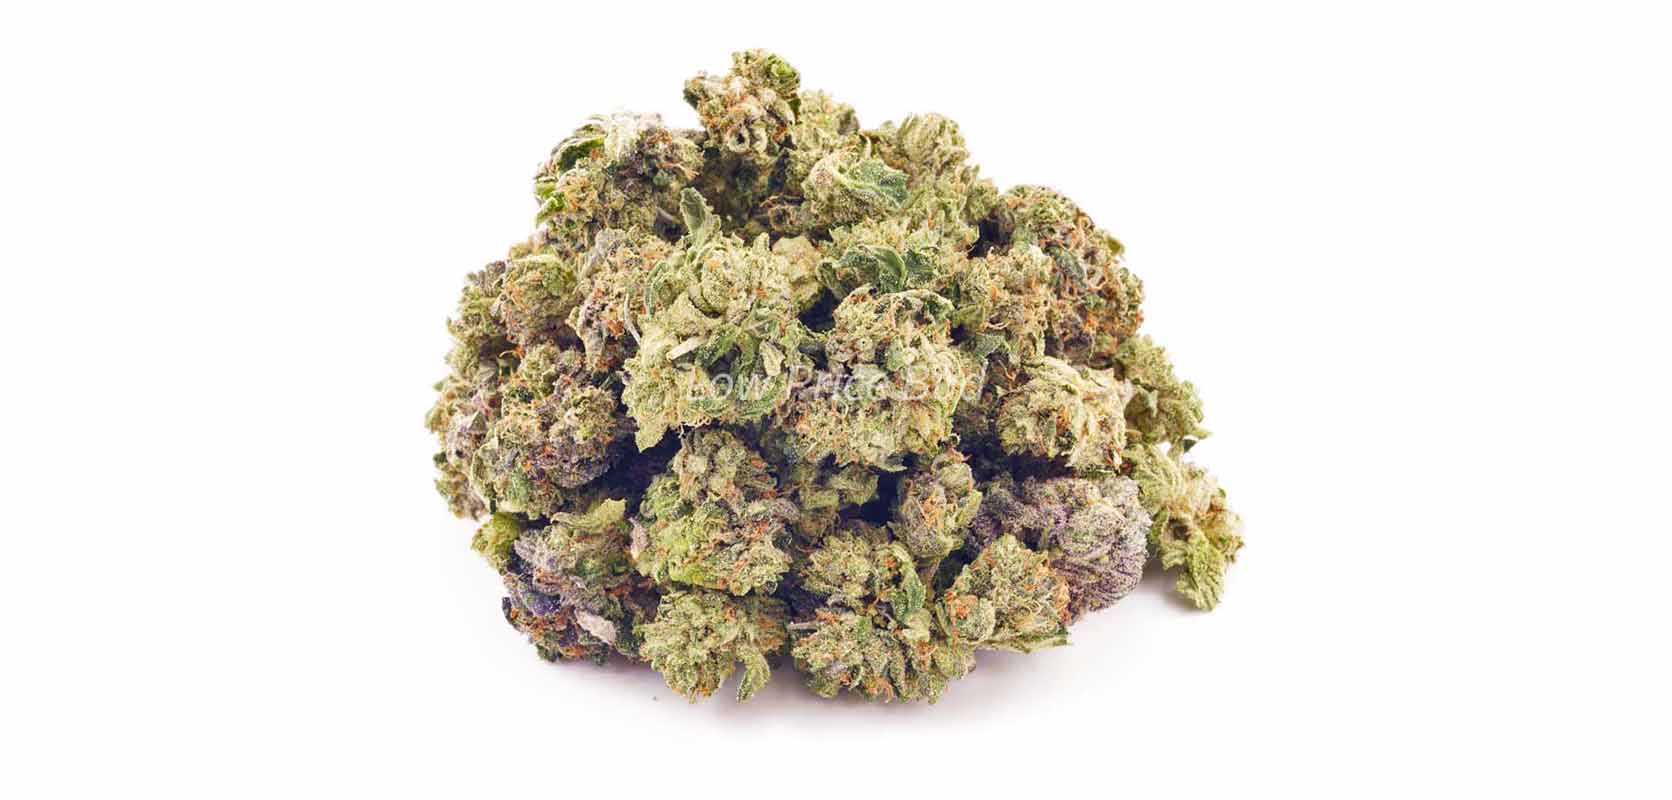 Pink Bubba cheap canna budget buds from Low Price Bud weed store and online dispensary Canada.